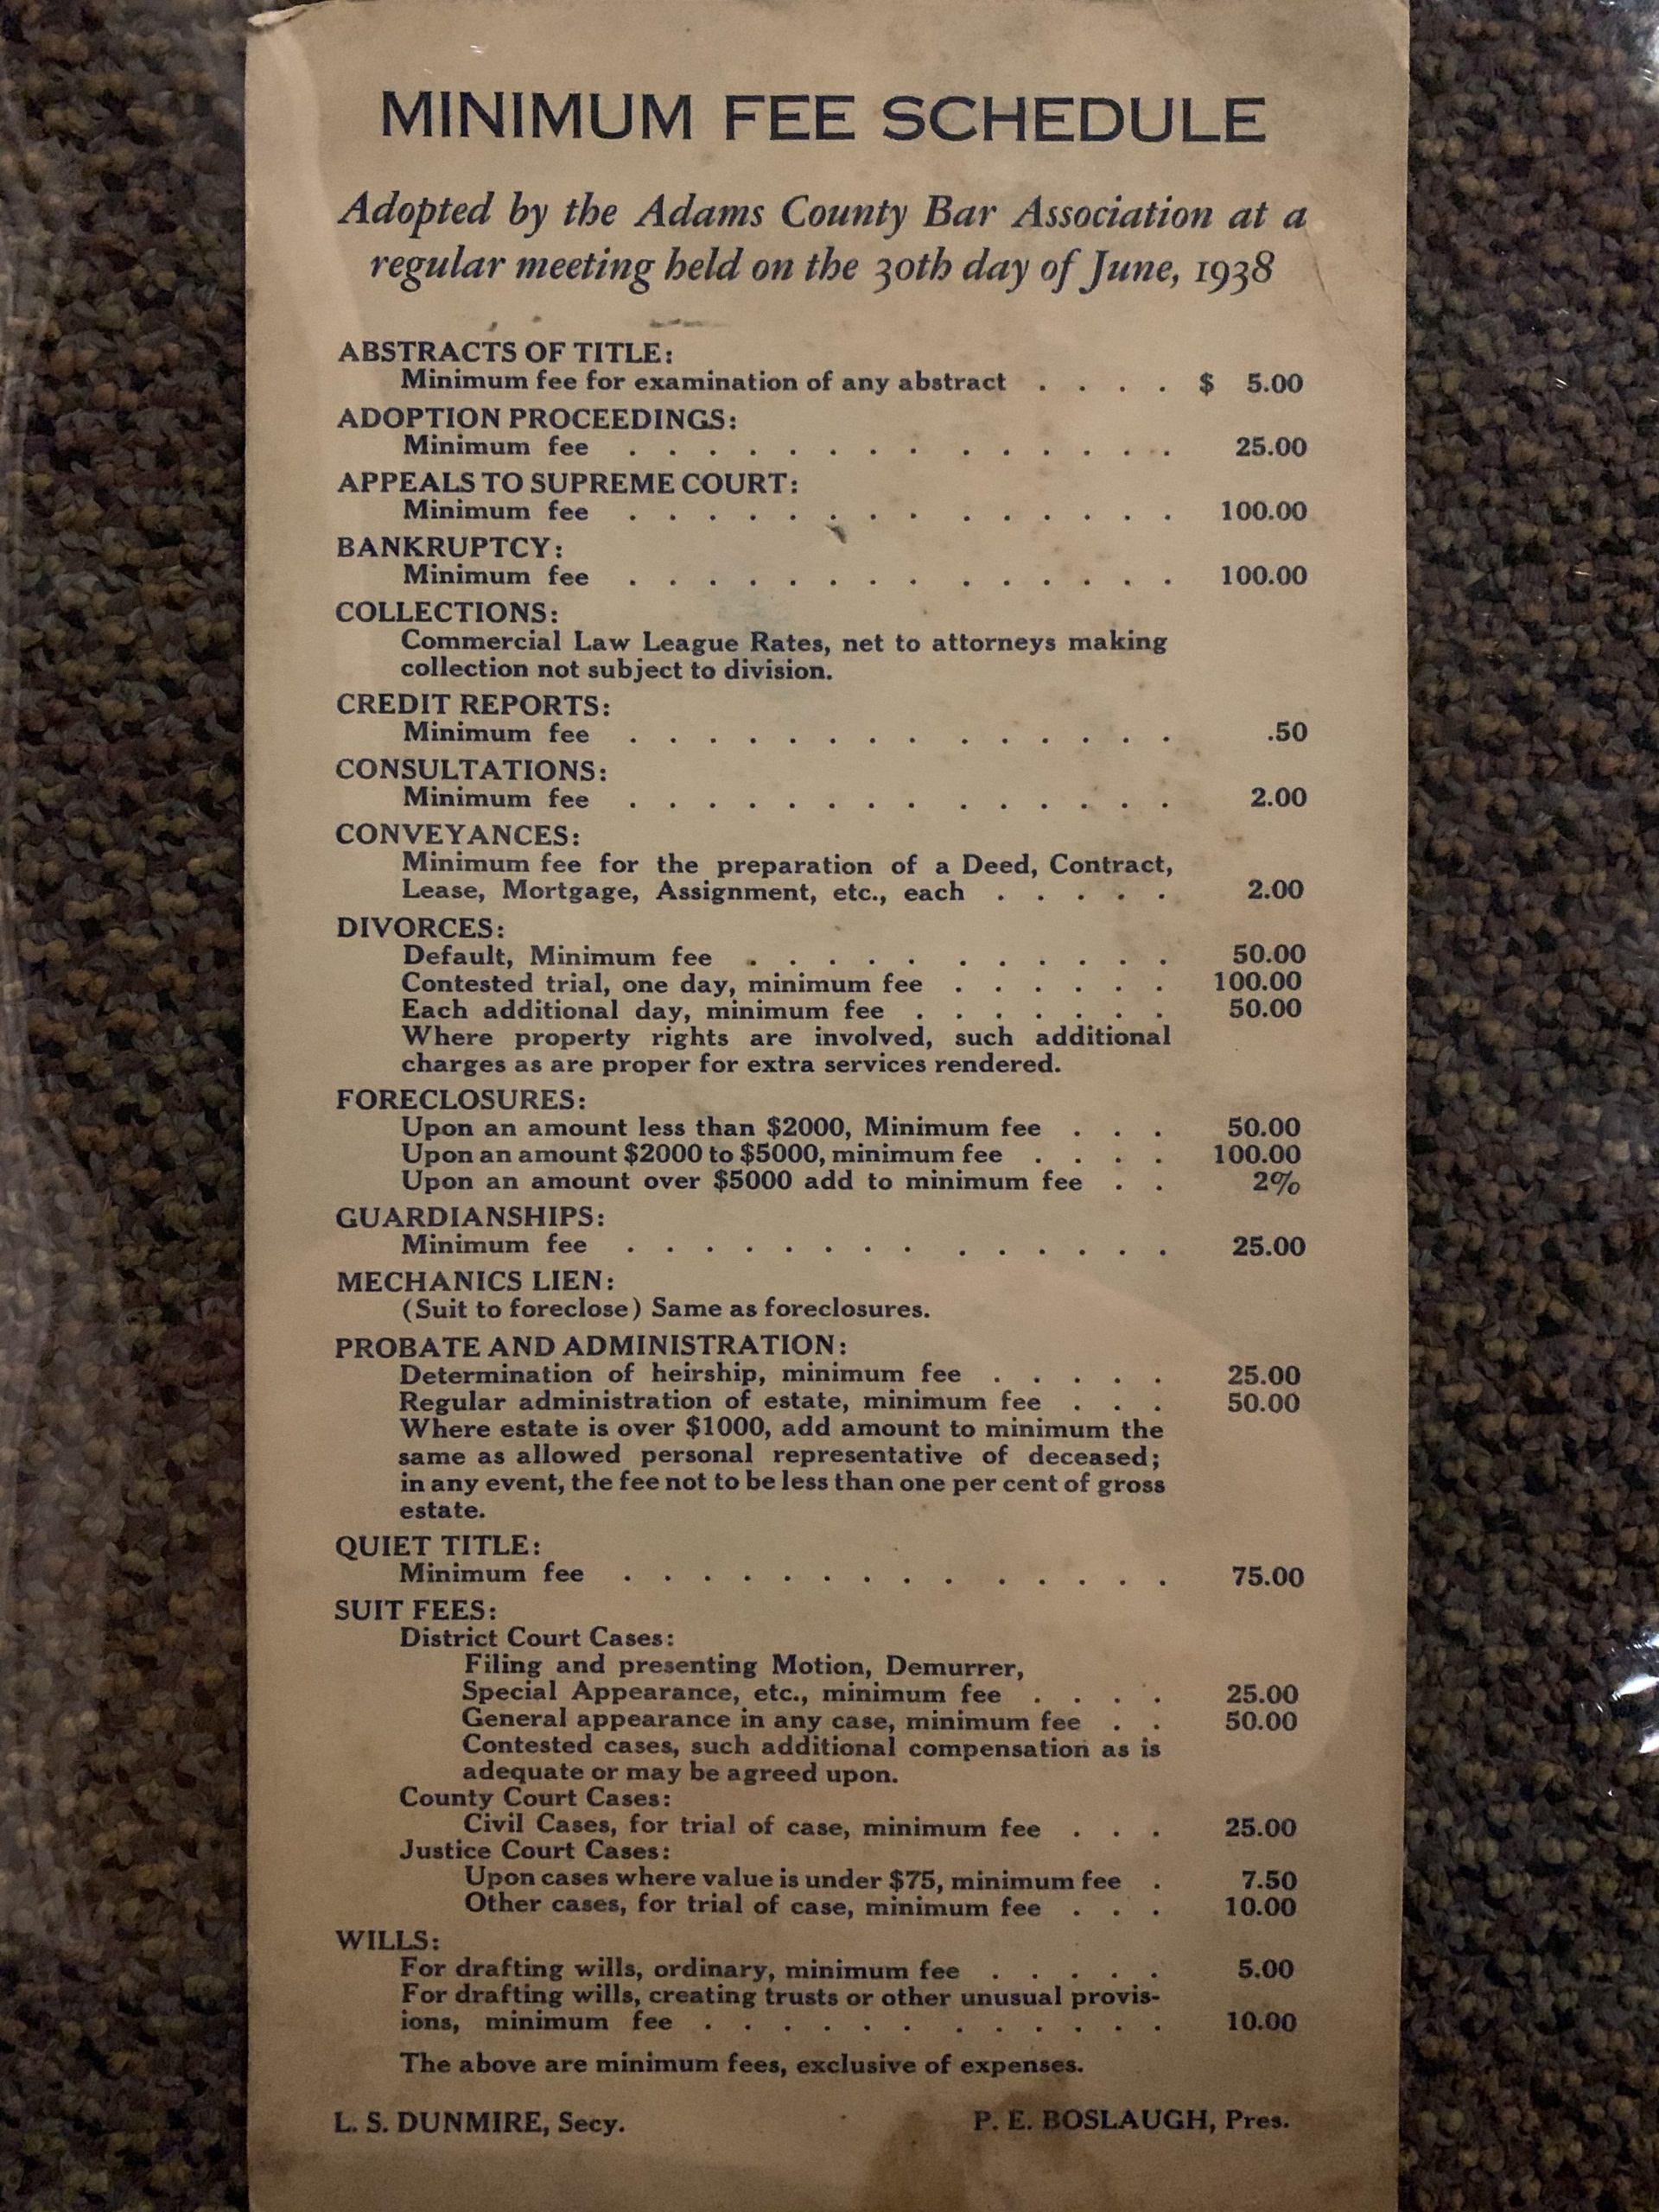 Fee Schedule, 1938. Adams County Bar Association fees for services.